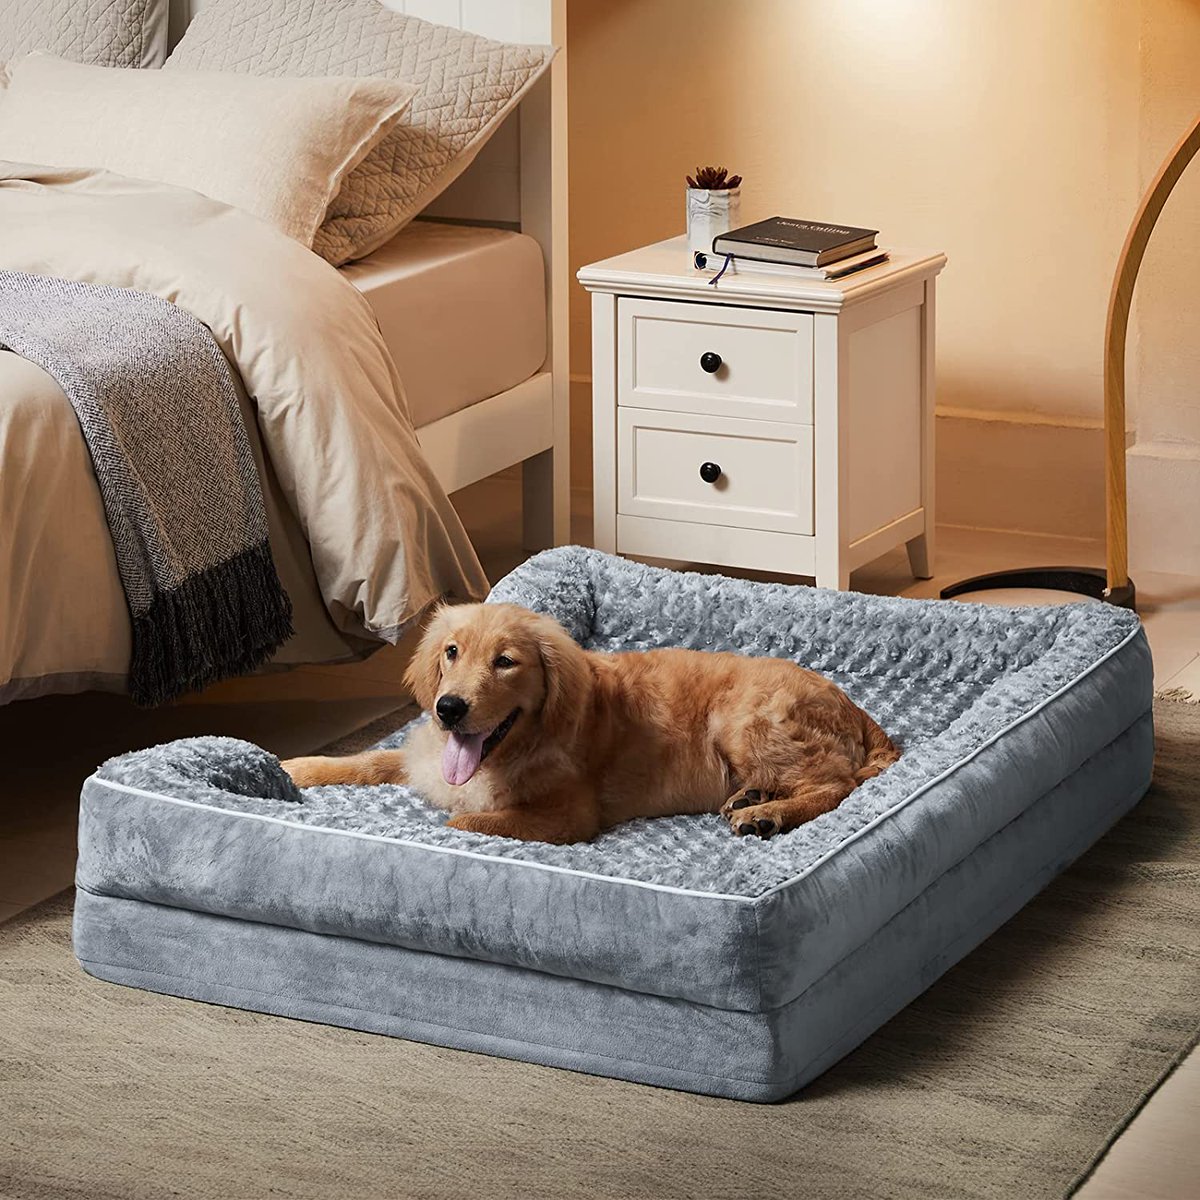 Quality Dog Beds for Your Special Family Member
Was ($44.99), Now ($38.69)

amzn.to/3MKretg

#DogLover #dogsoftwitter #dogmomlife #dogmom #DogBed #dogs #furrfam #Dogsarefamily #DogSale #DogsOnTwitter